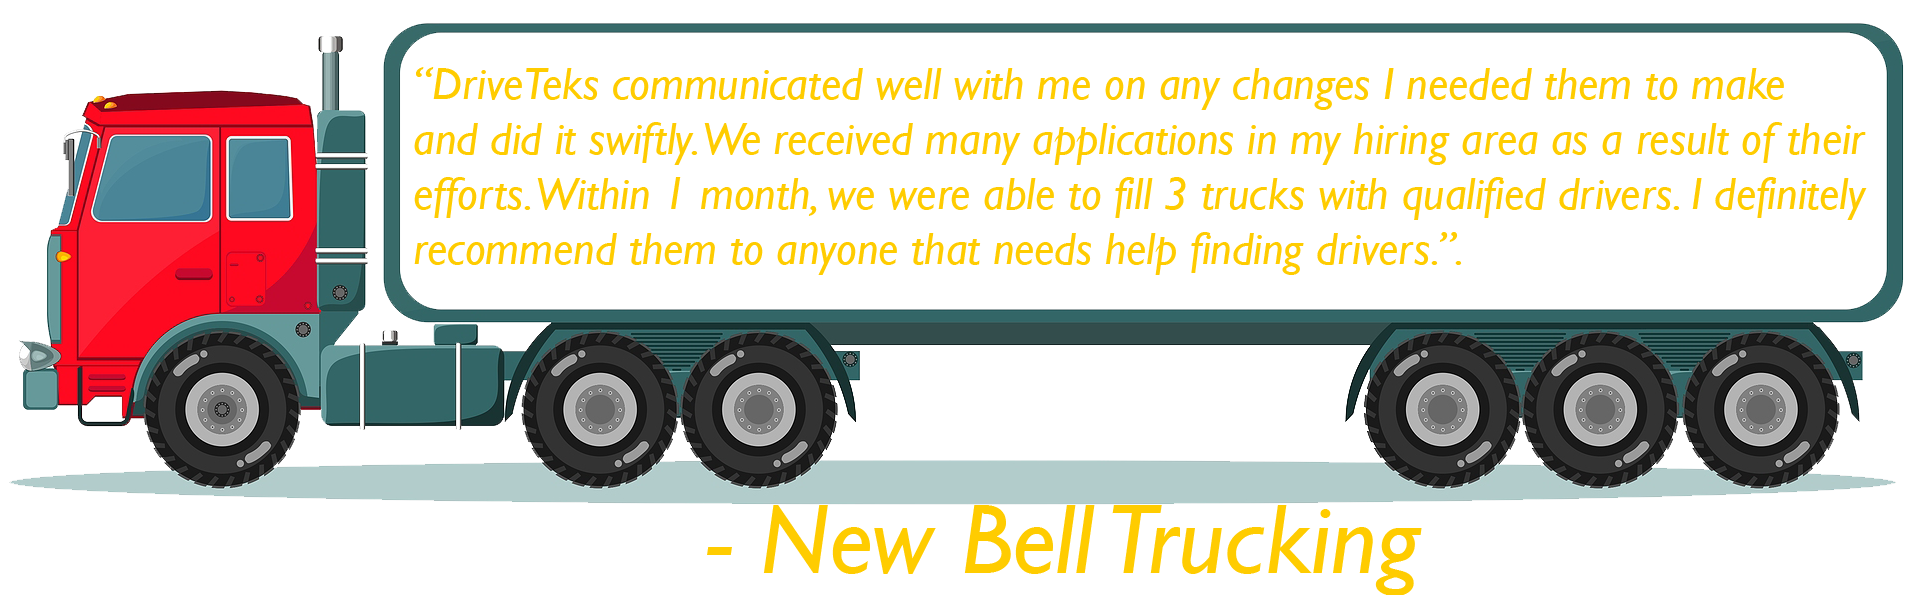 Testimonial from New Bell Trucking on side of semi truck